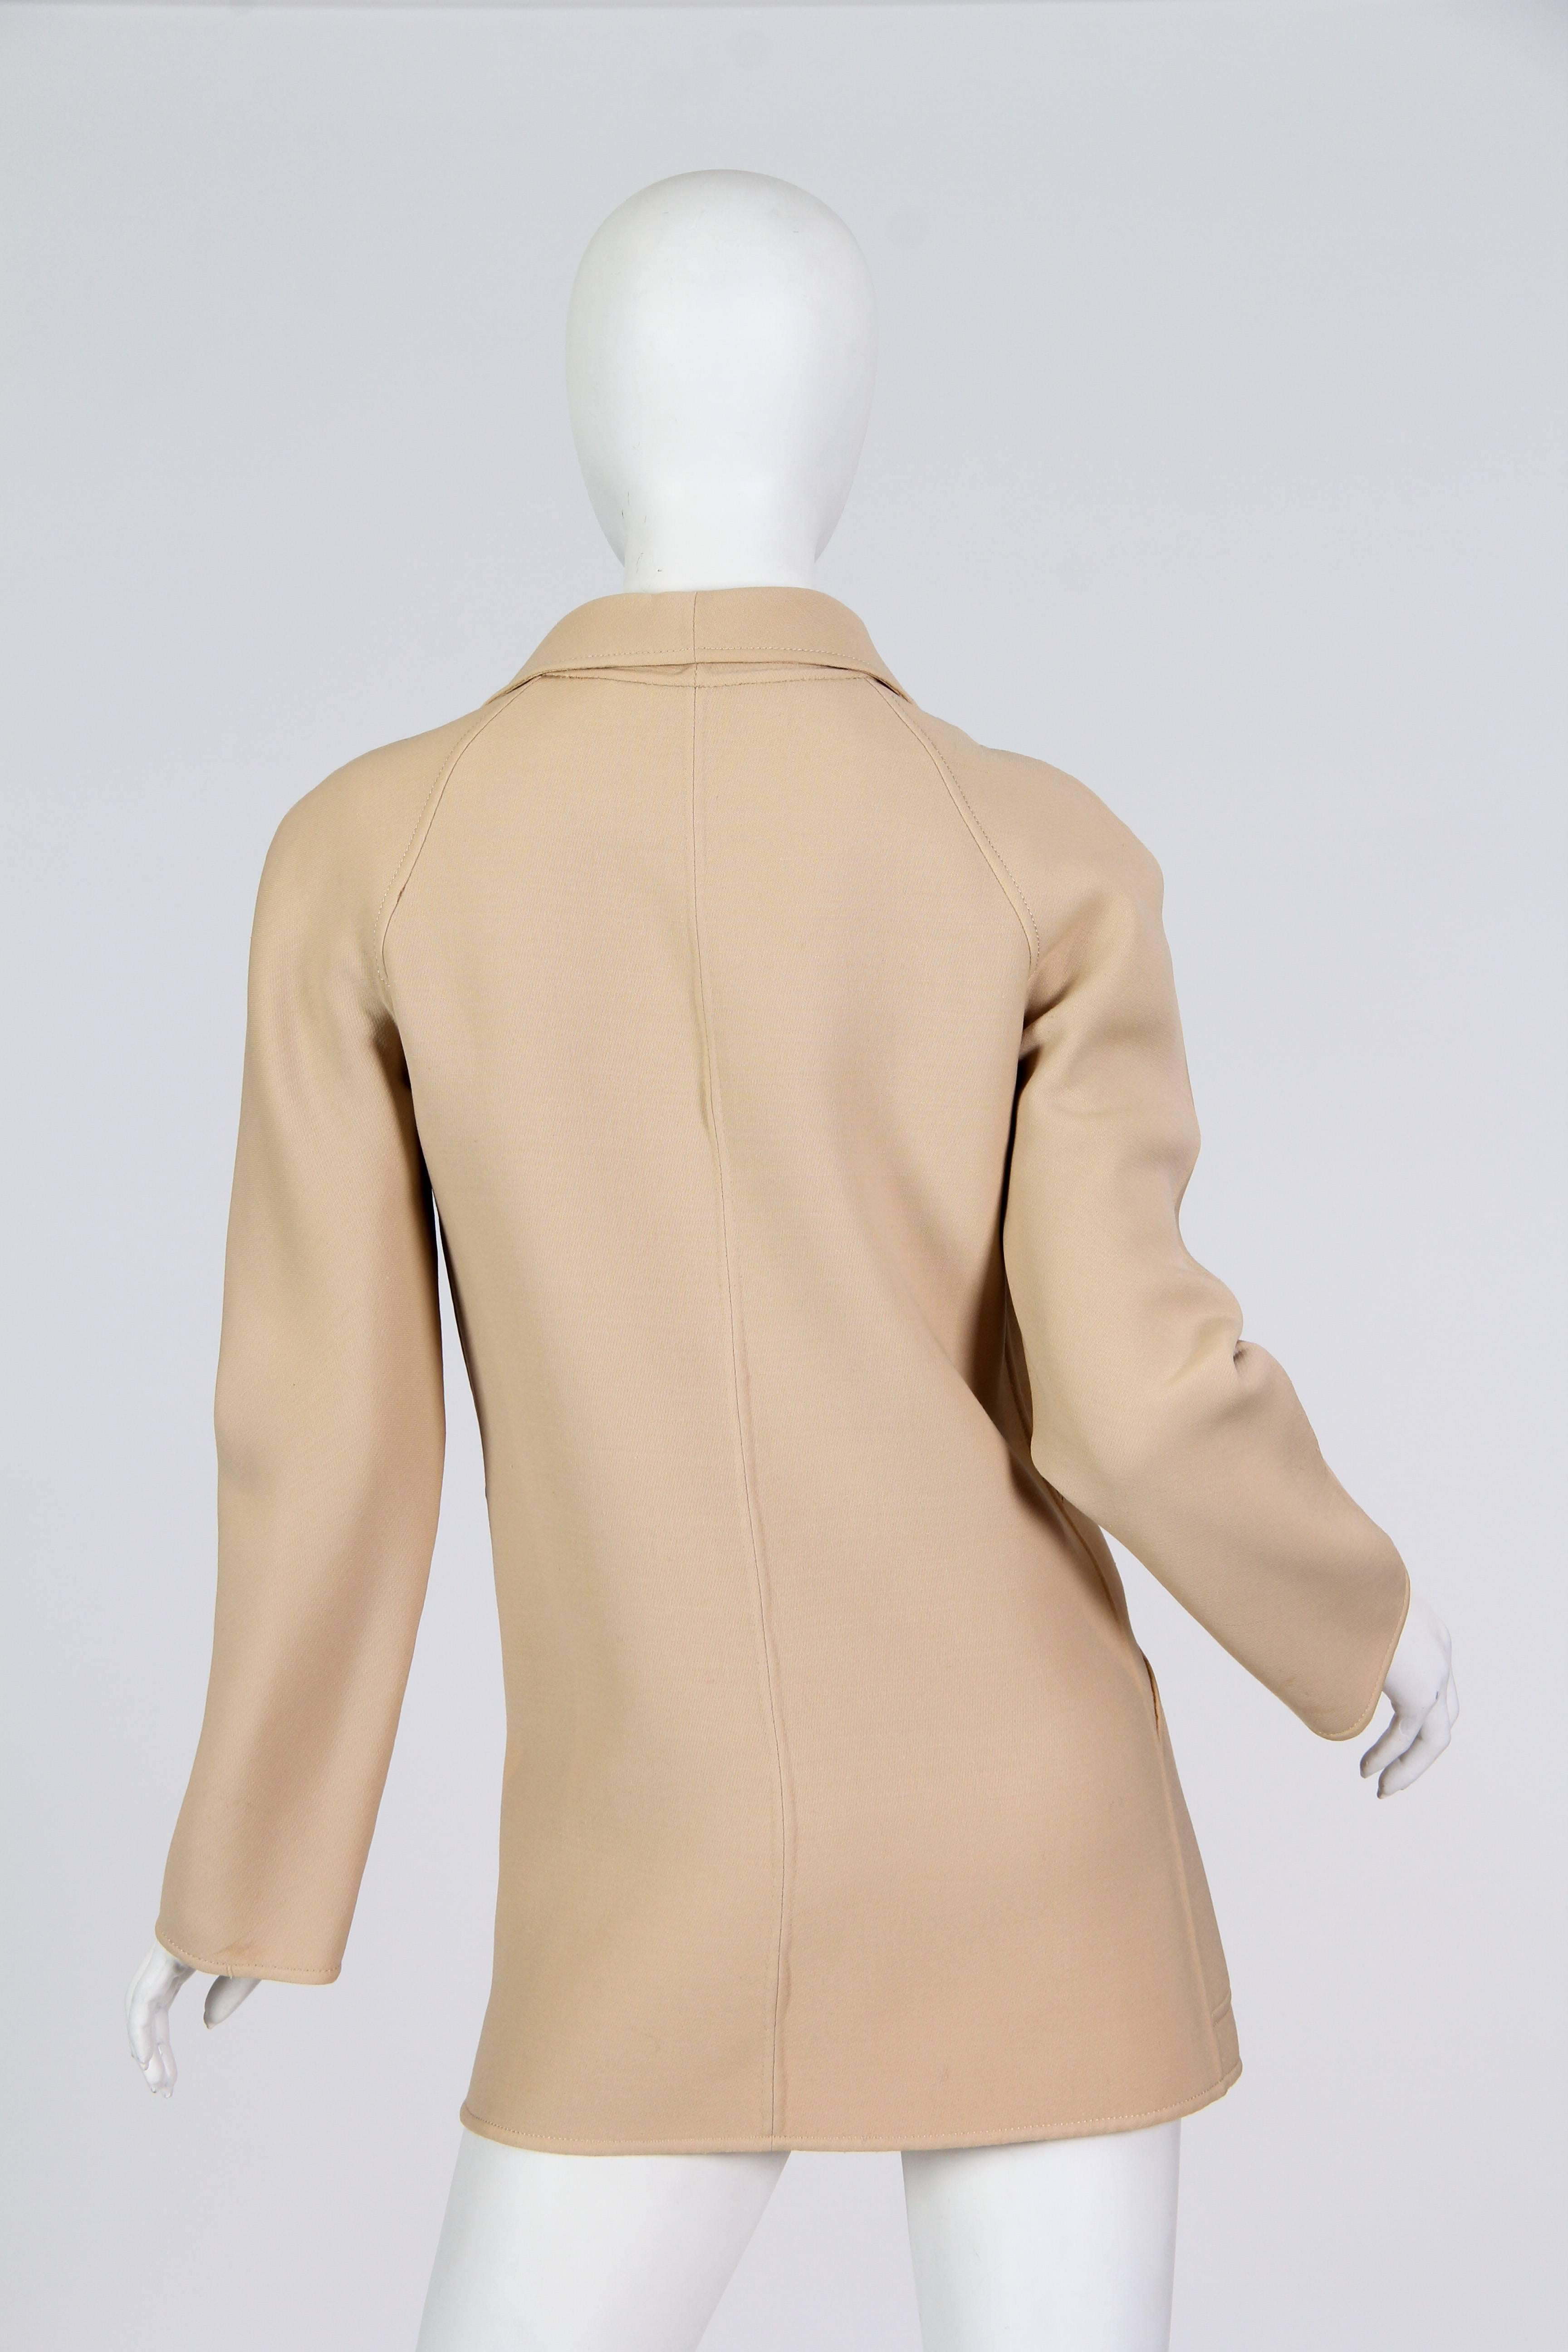 Valentino Couture 1960/70s Lightweight Wool Jacket 1